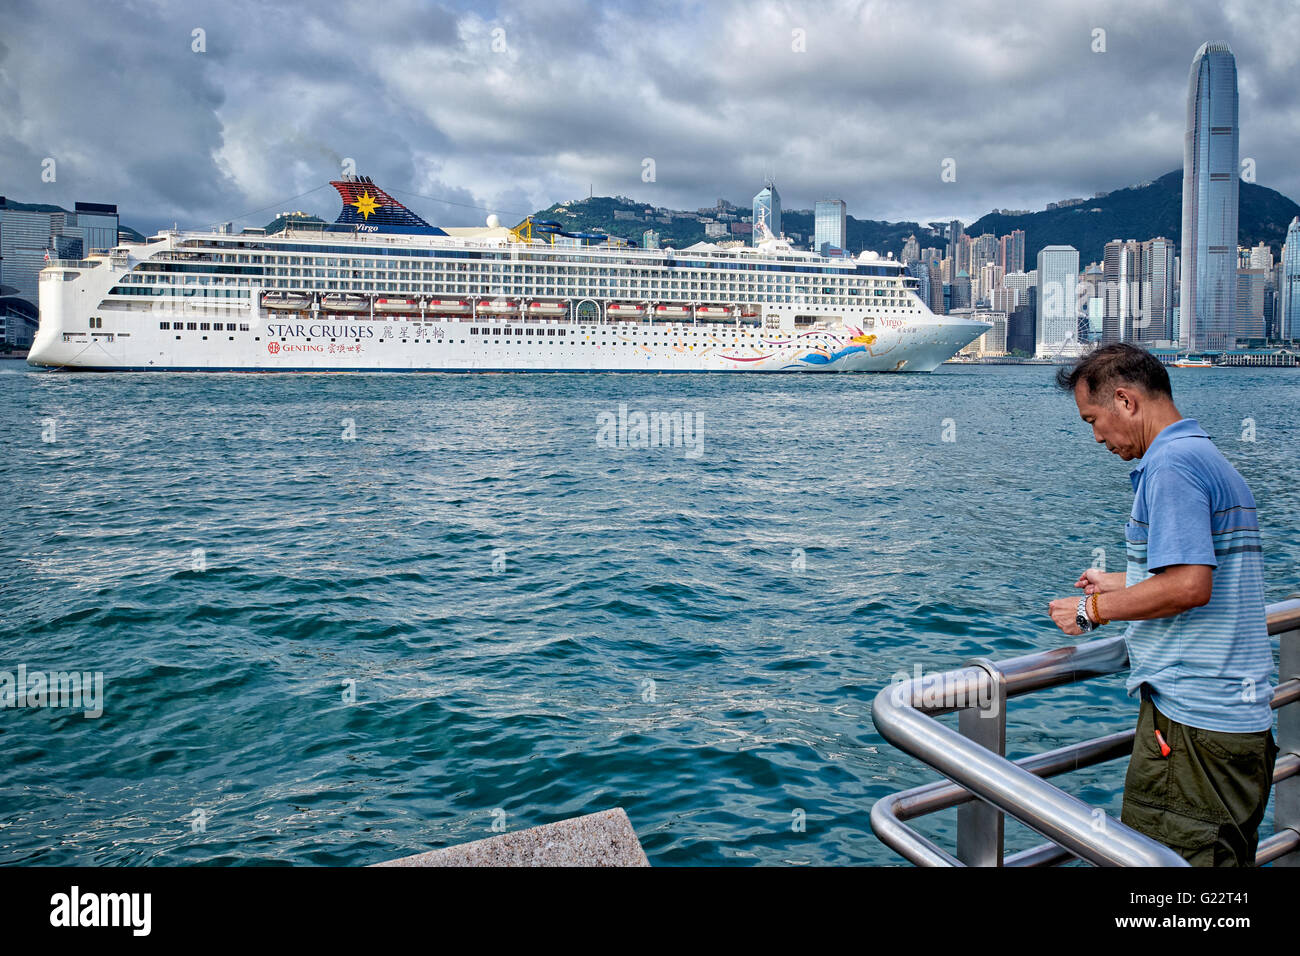 HONG KONG, VICTORIA HARBOUR: A man is handline fishing at the side of Victoria Harbour while a luxury cruise liner passes by. Stock Photo